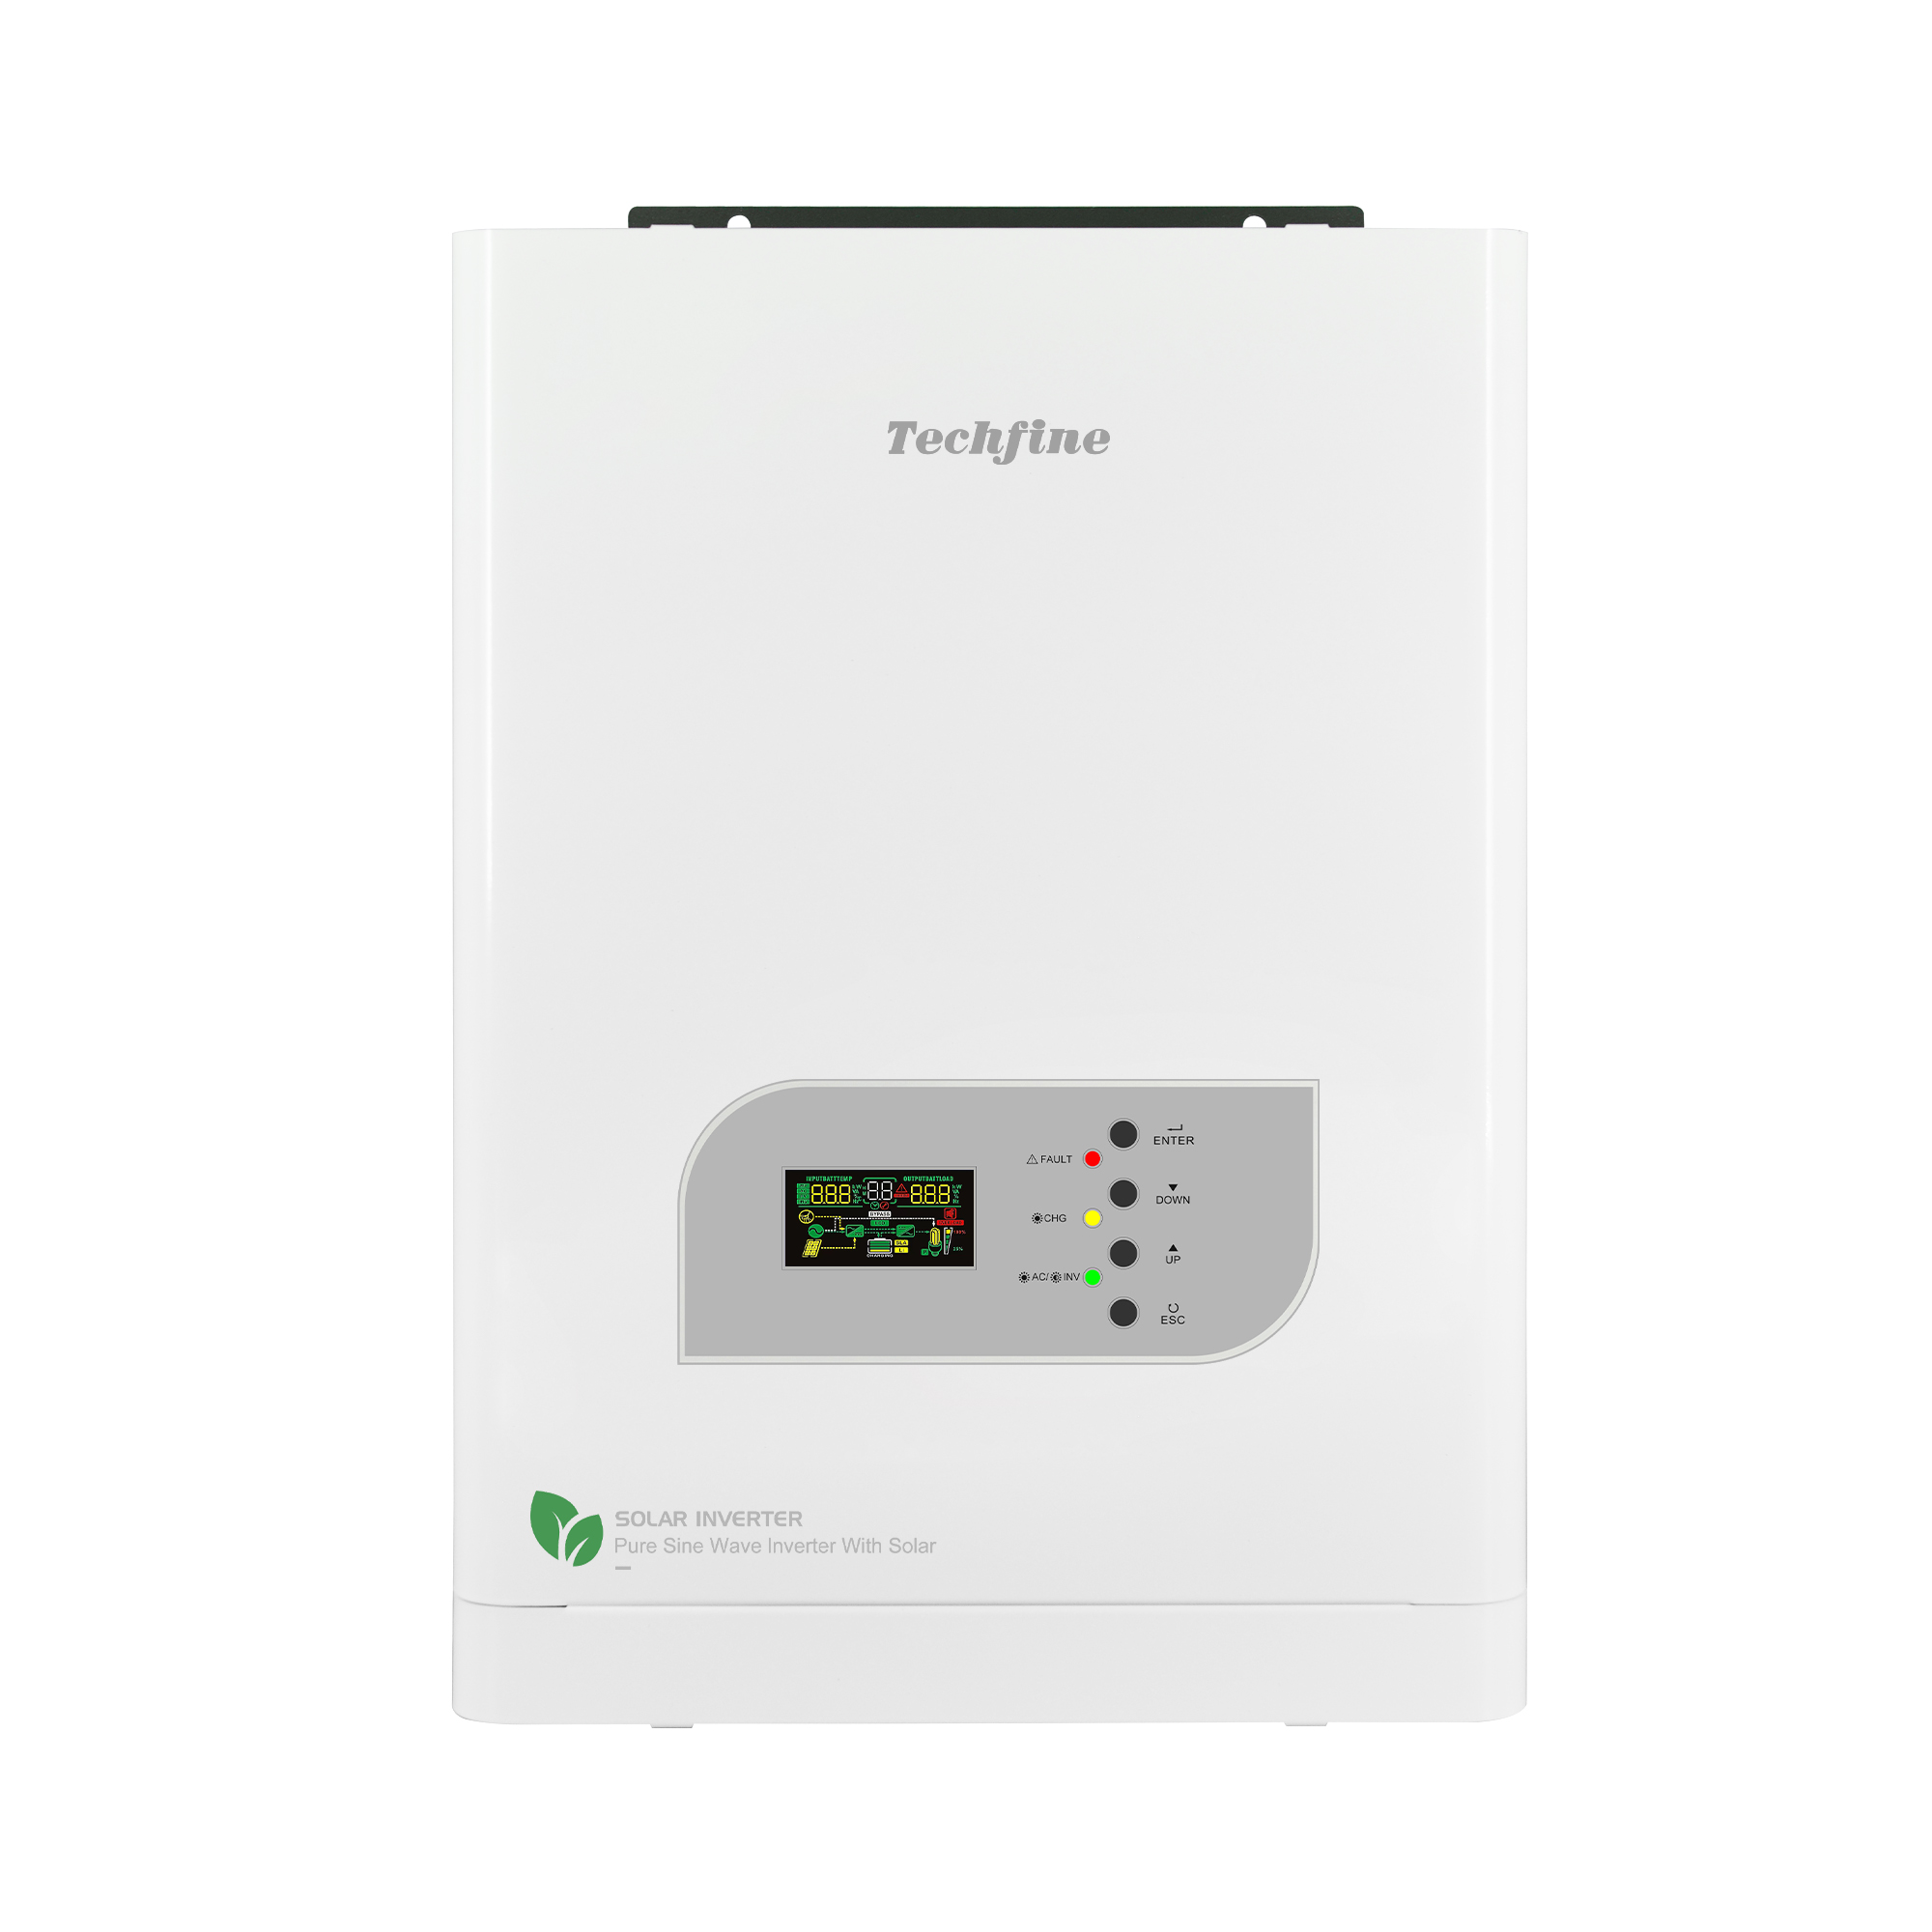  Low Frequency off grid 4KVA 3.2KW 3200W 48VDC 220VAC 3200W 4KVA built in 60A MPPT Solar inverter